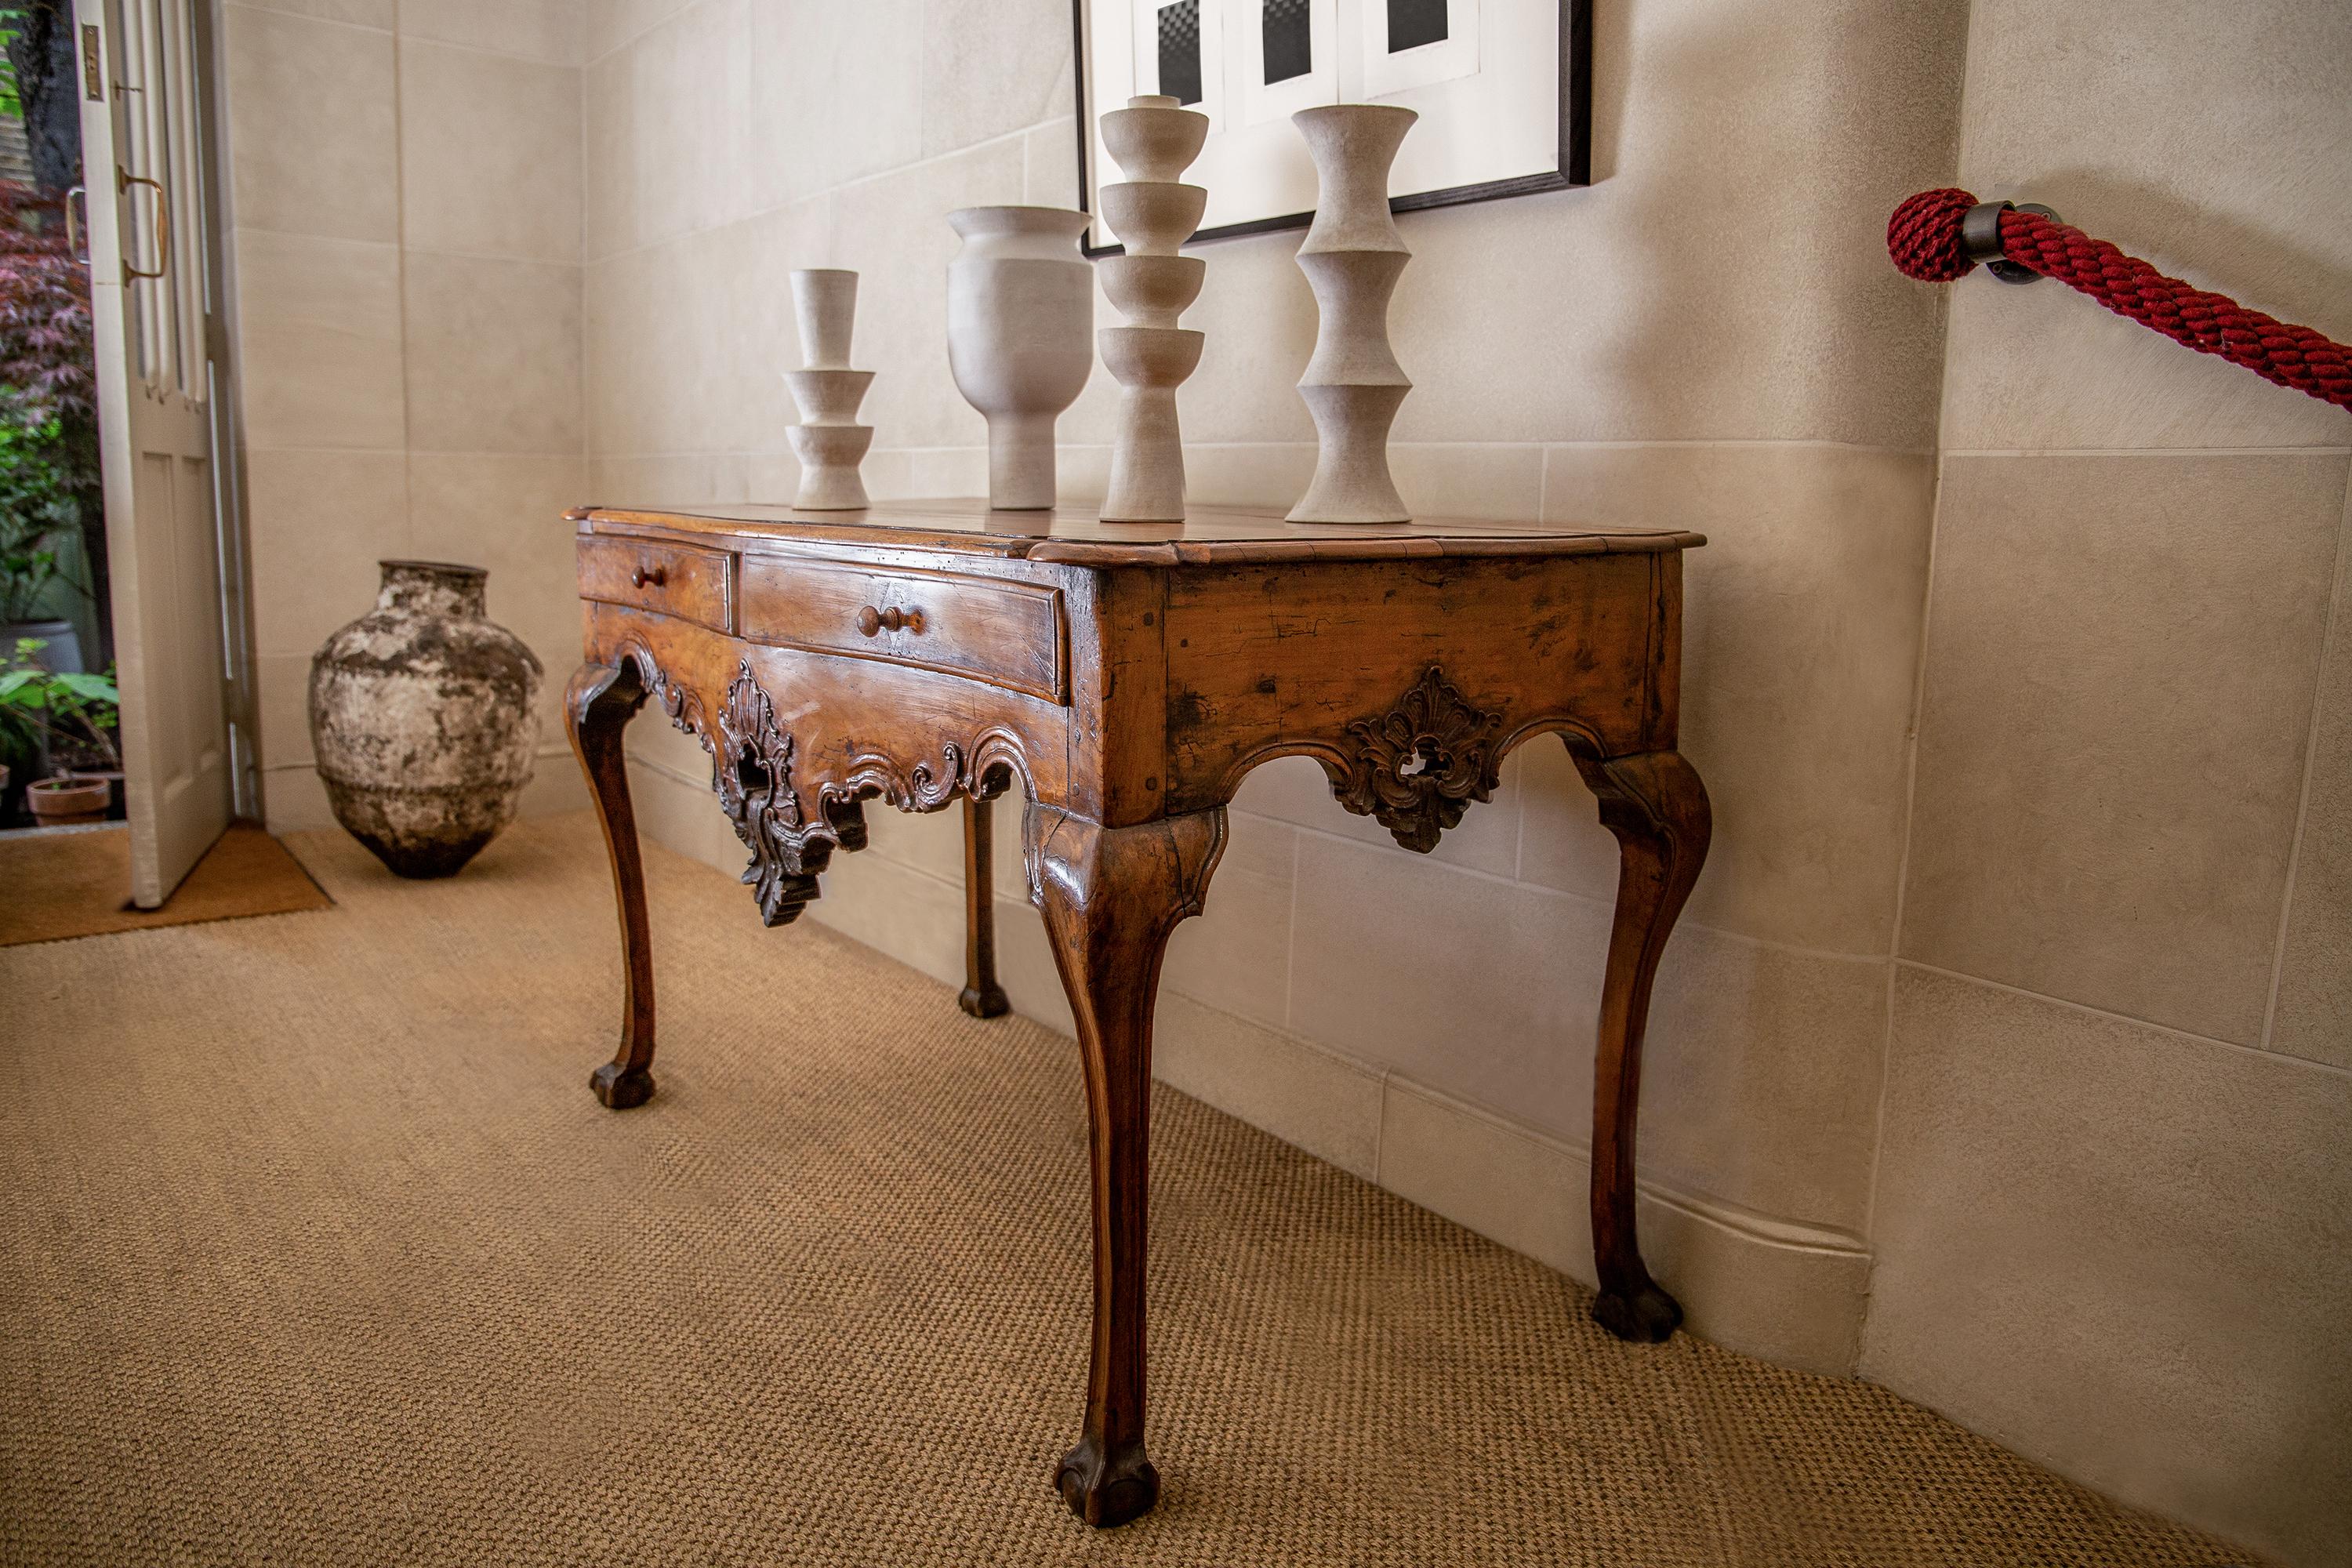 Exquisite lines, beautiful form early 18th century walnut and cherrywood Portuguese side table. Featuring an ideal patina and mellow tones, carved deeply scalloped front apron and side skirts, outwardly scrolling and unusual quadriform cabriole legs